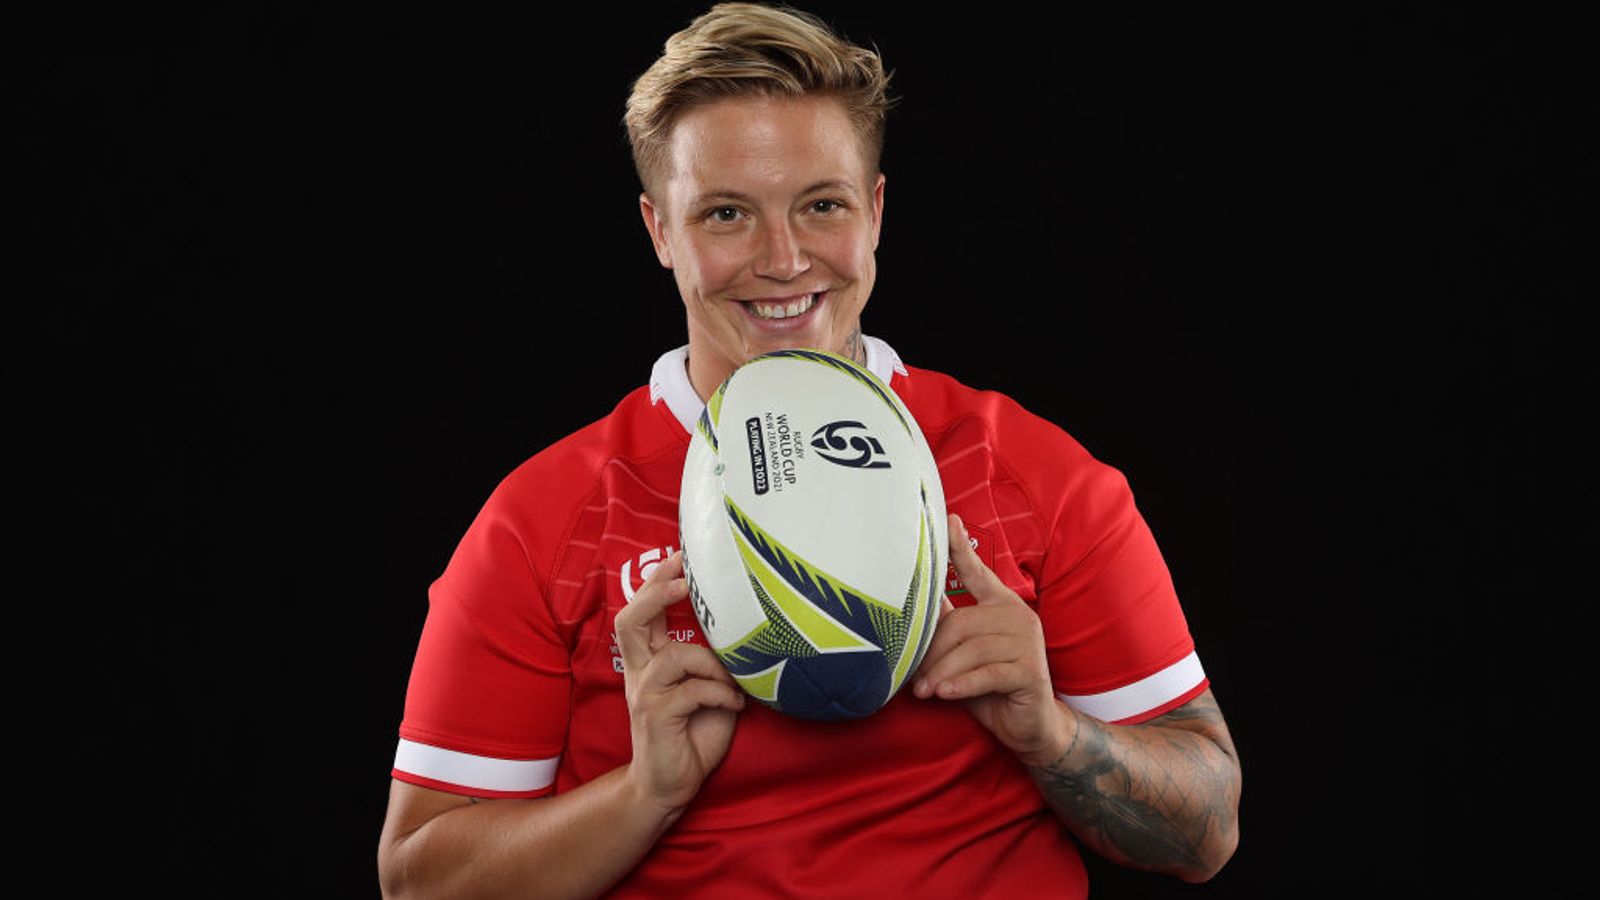 Rugby World Cup: Wales prop Donna Rose on life with borderline personality disorder – ‘People thought I was naughty’